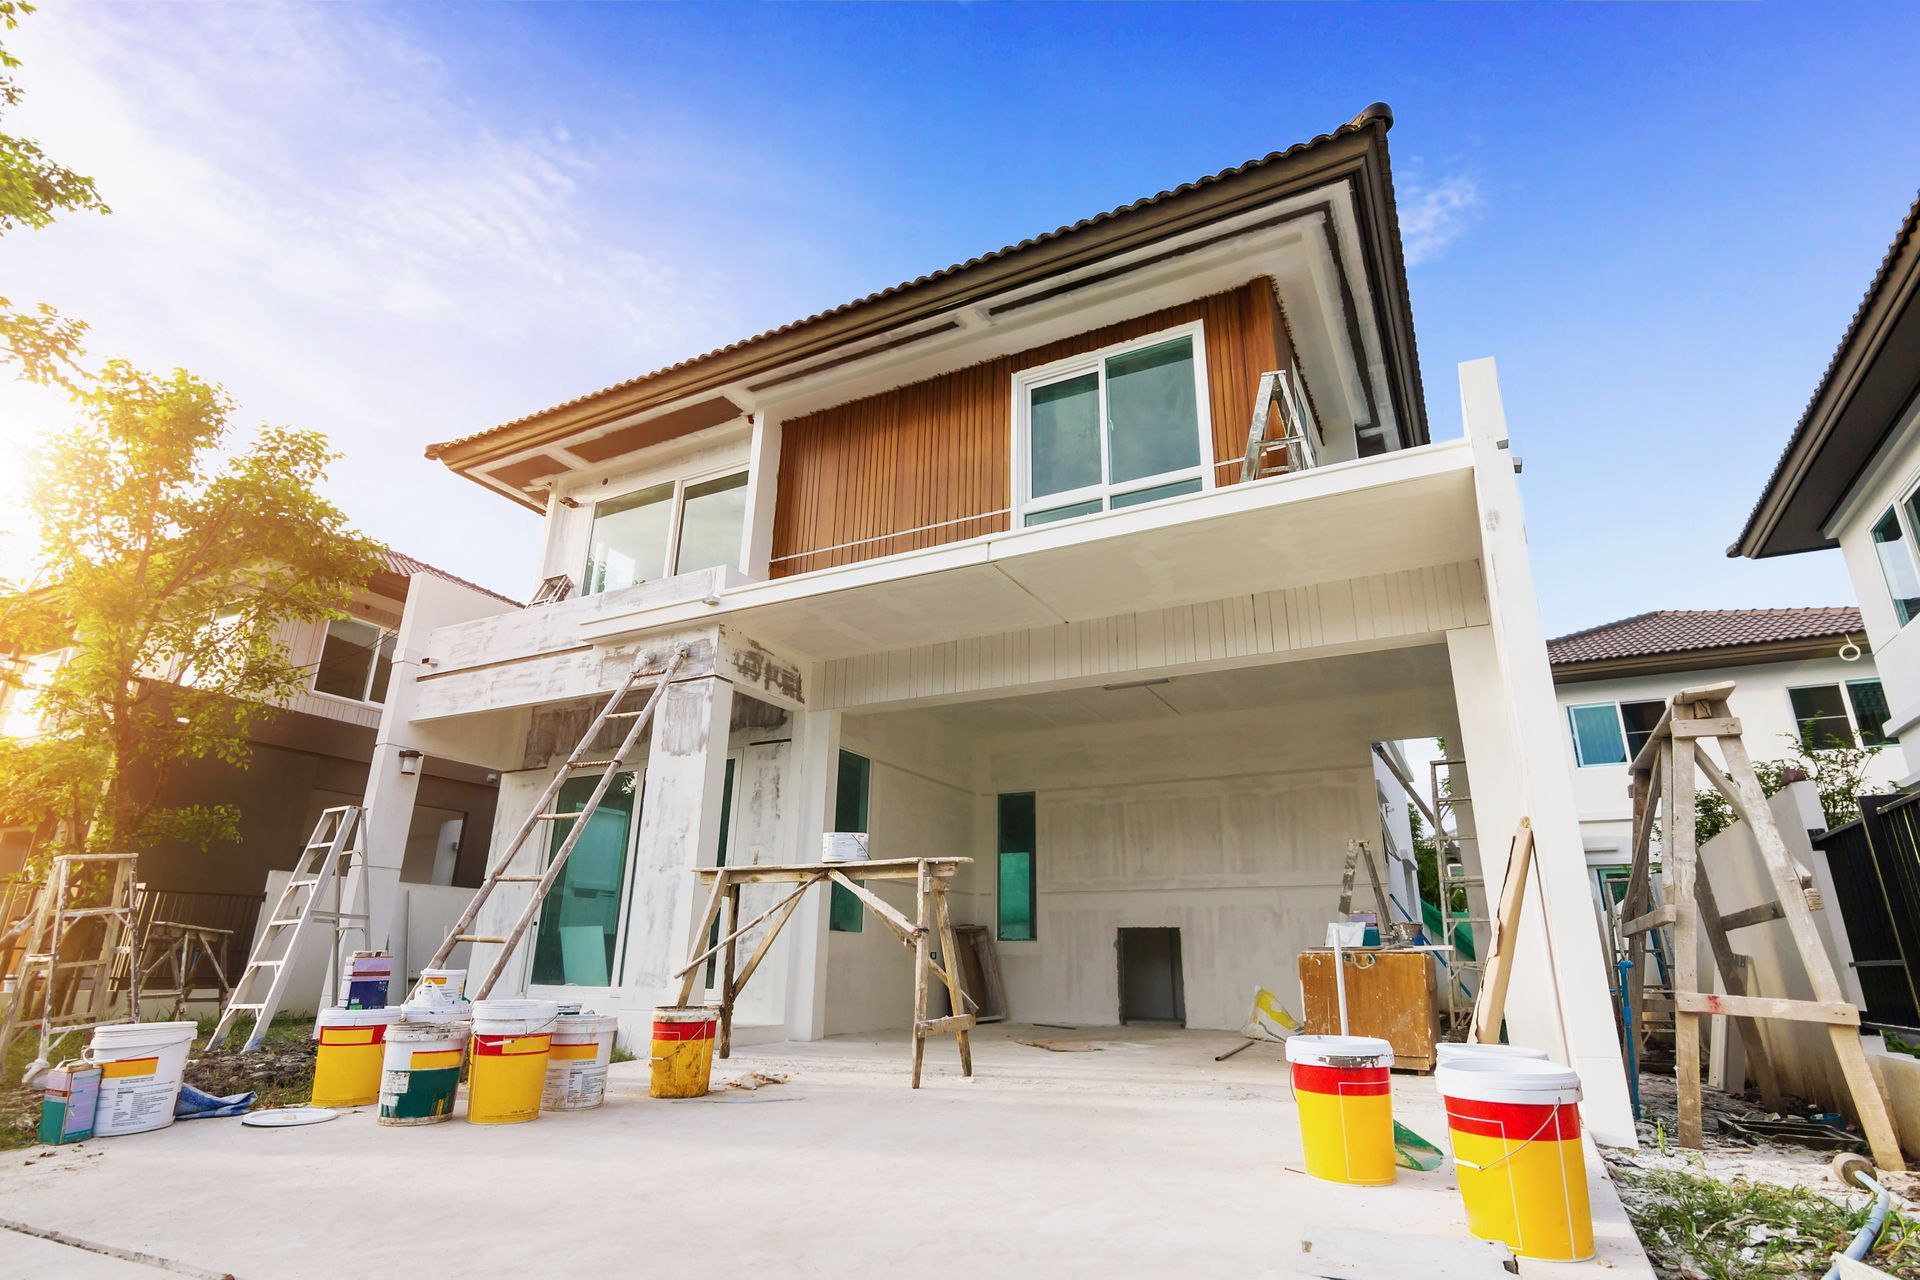 Exterior view of new house under construction and painting